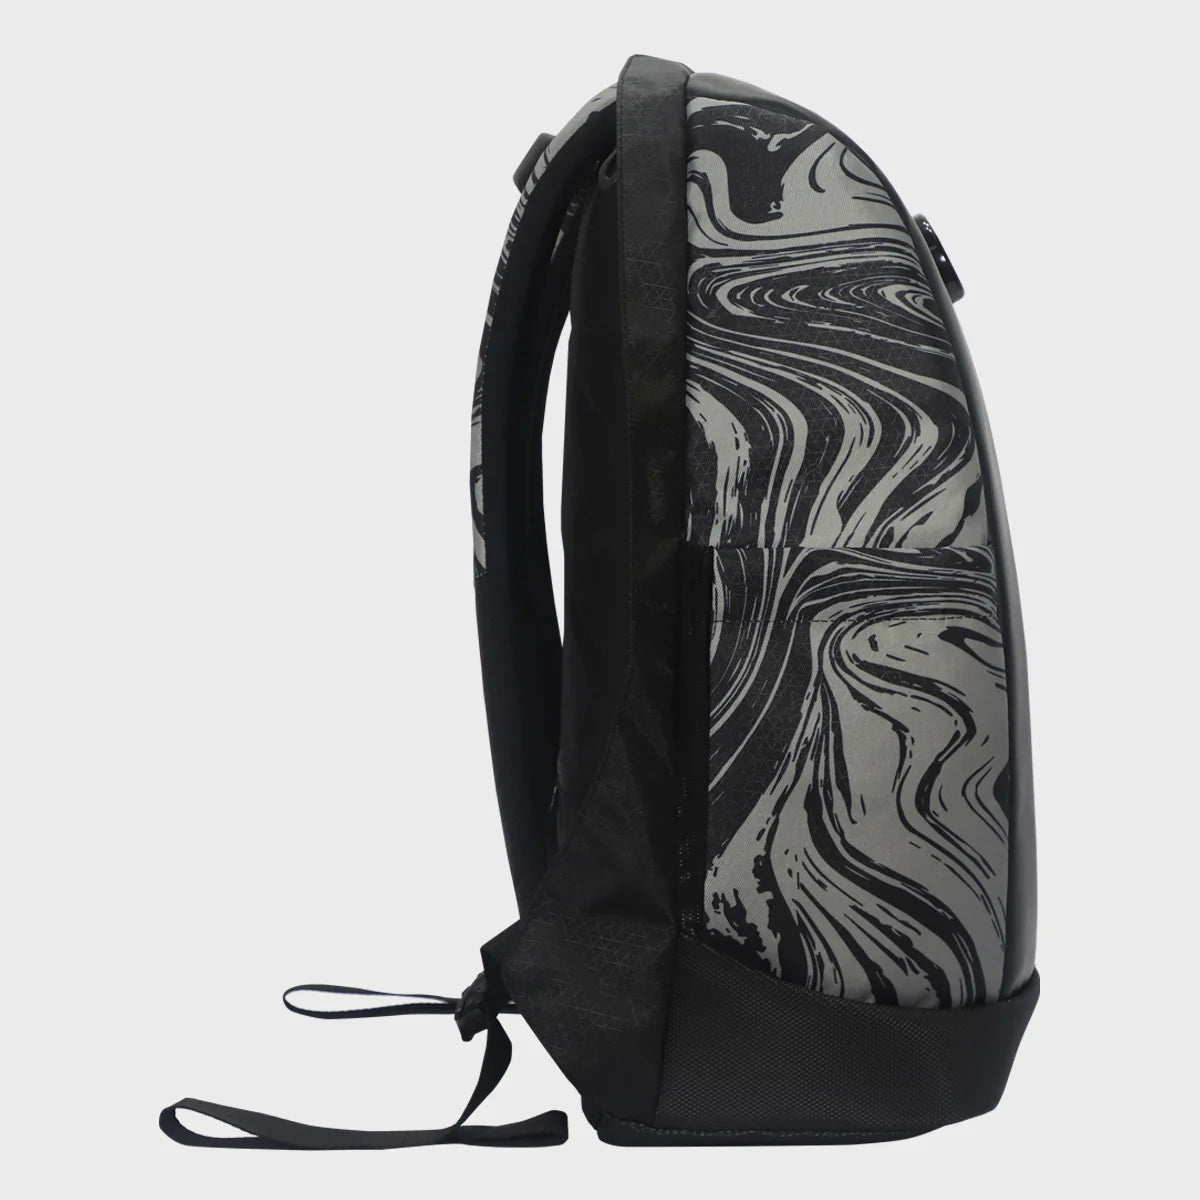 Arctic Fox Slope Anti-Theft Laptop bag and Backpack